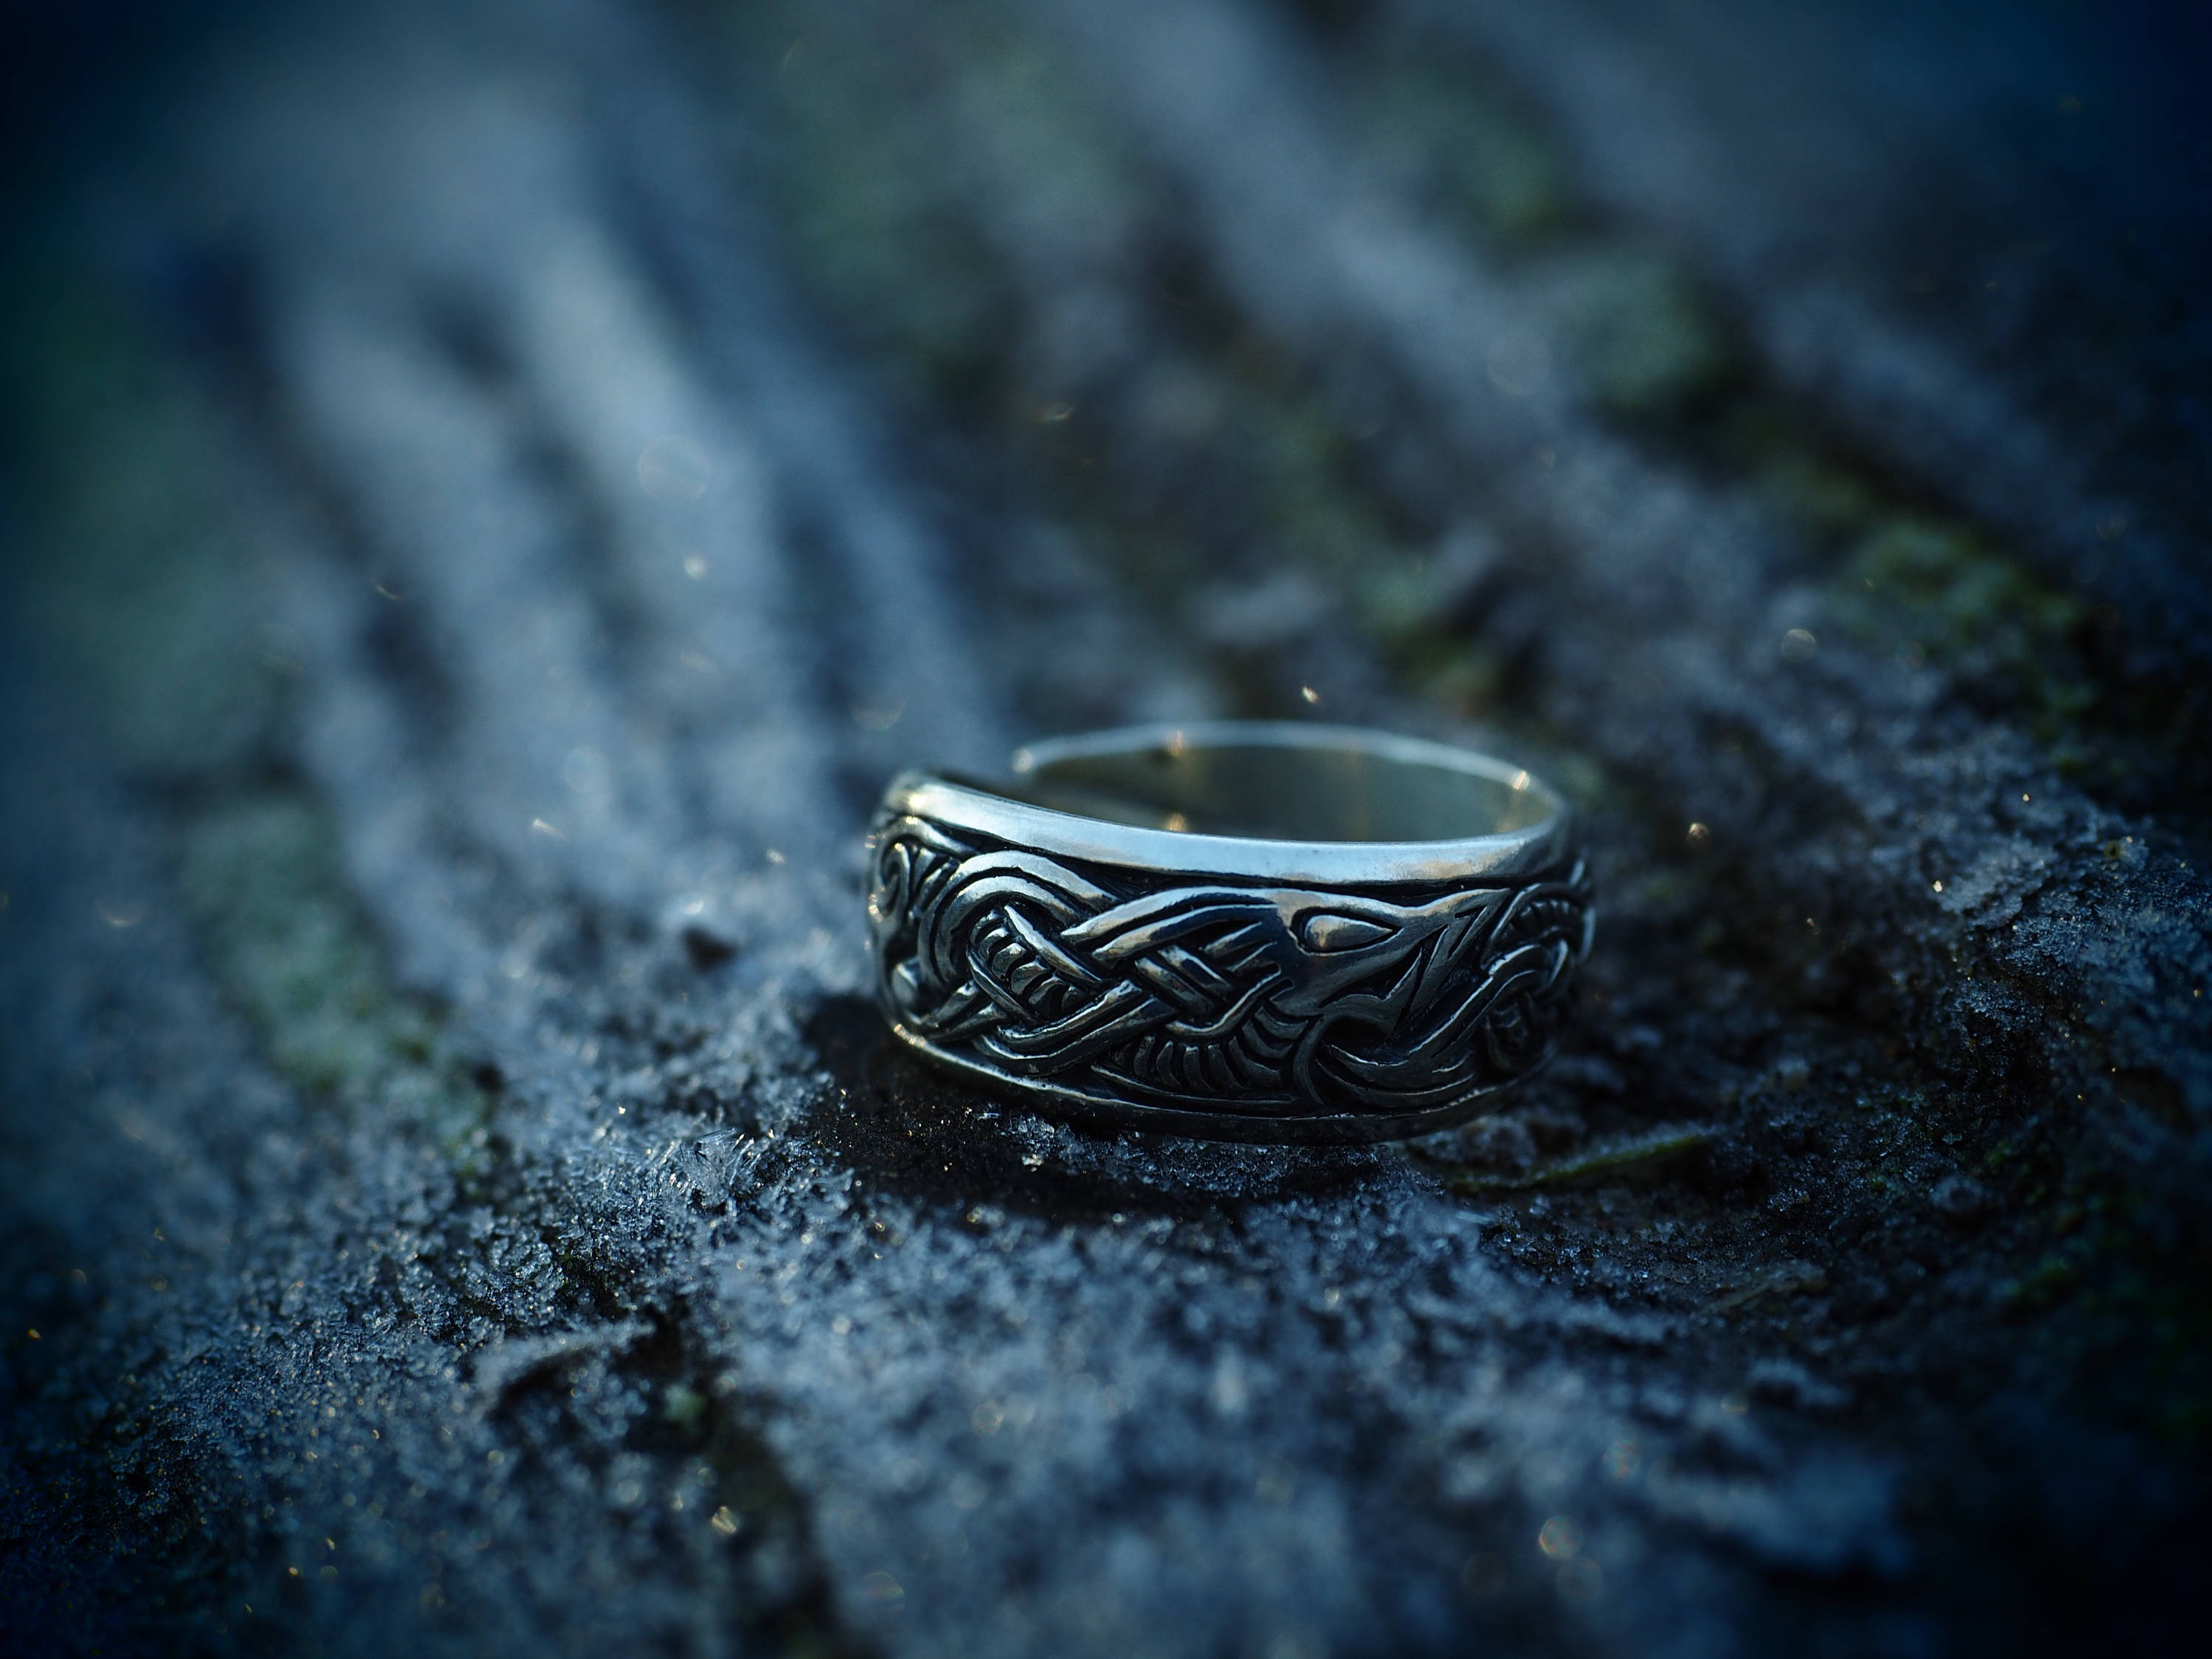 Silver Viking Dragon Ring From The Isle Of Man Viking Jewelry | lupon ...